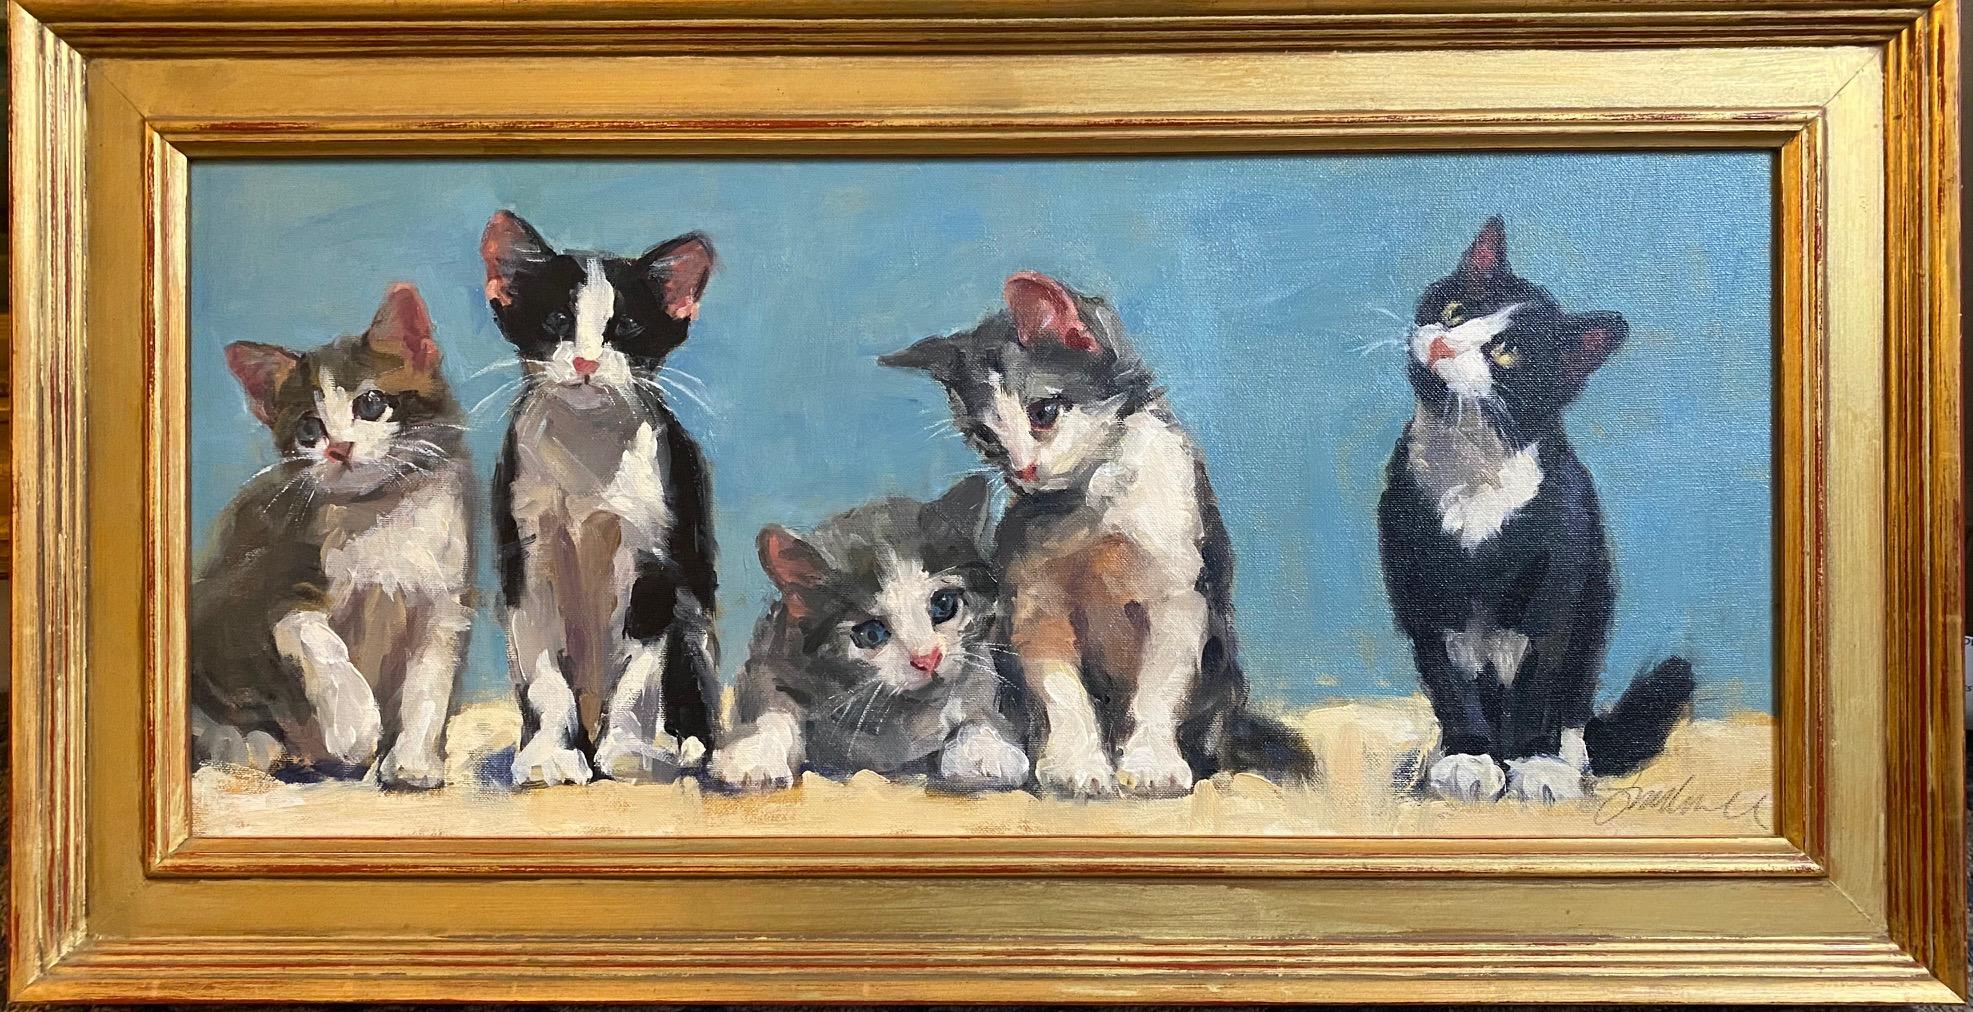 Spider on the Ceiling, original contemporary figurative landscape of kittens